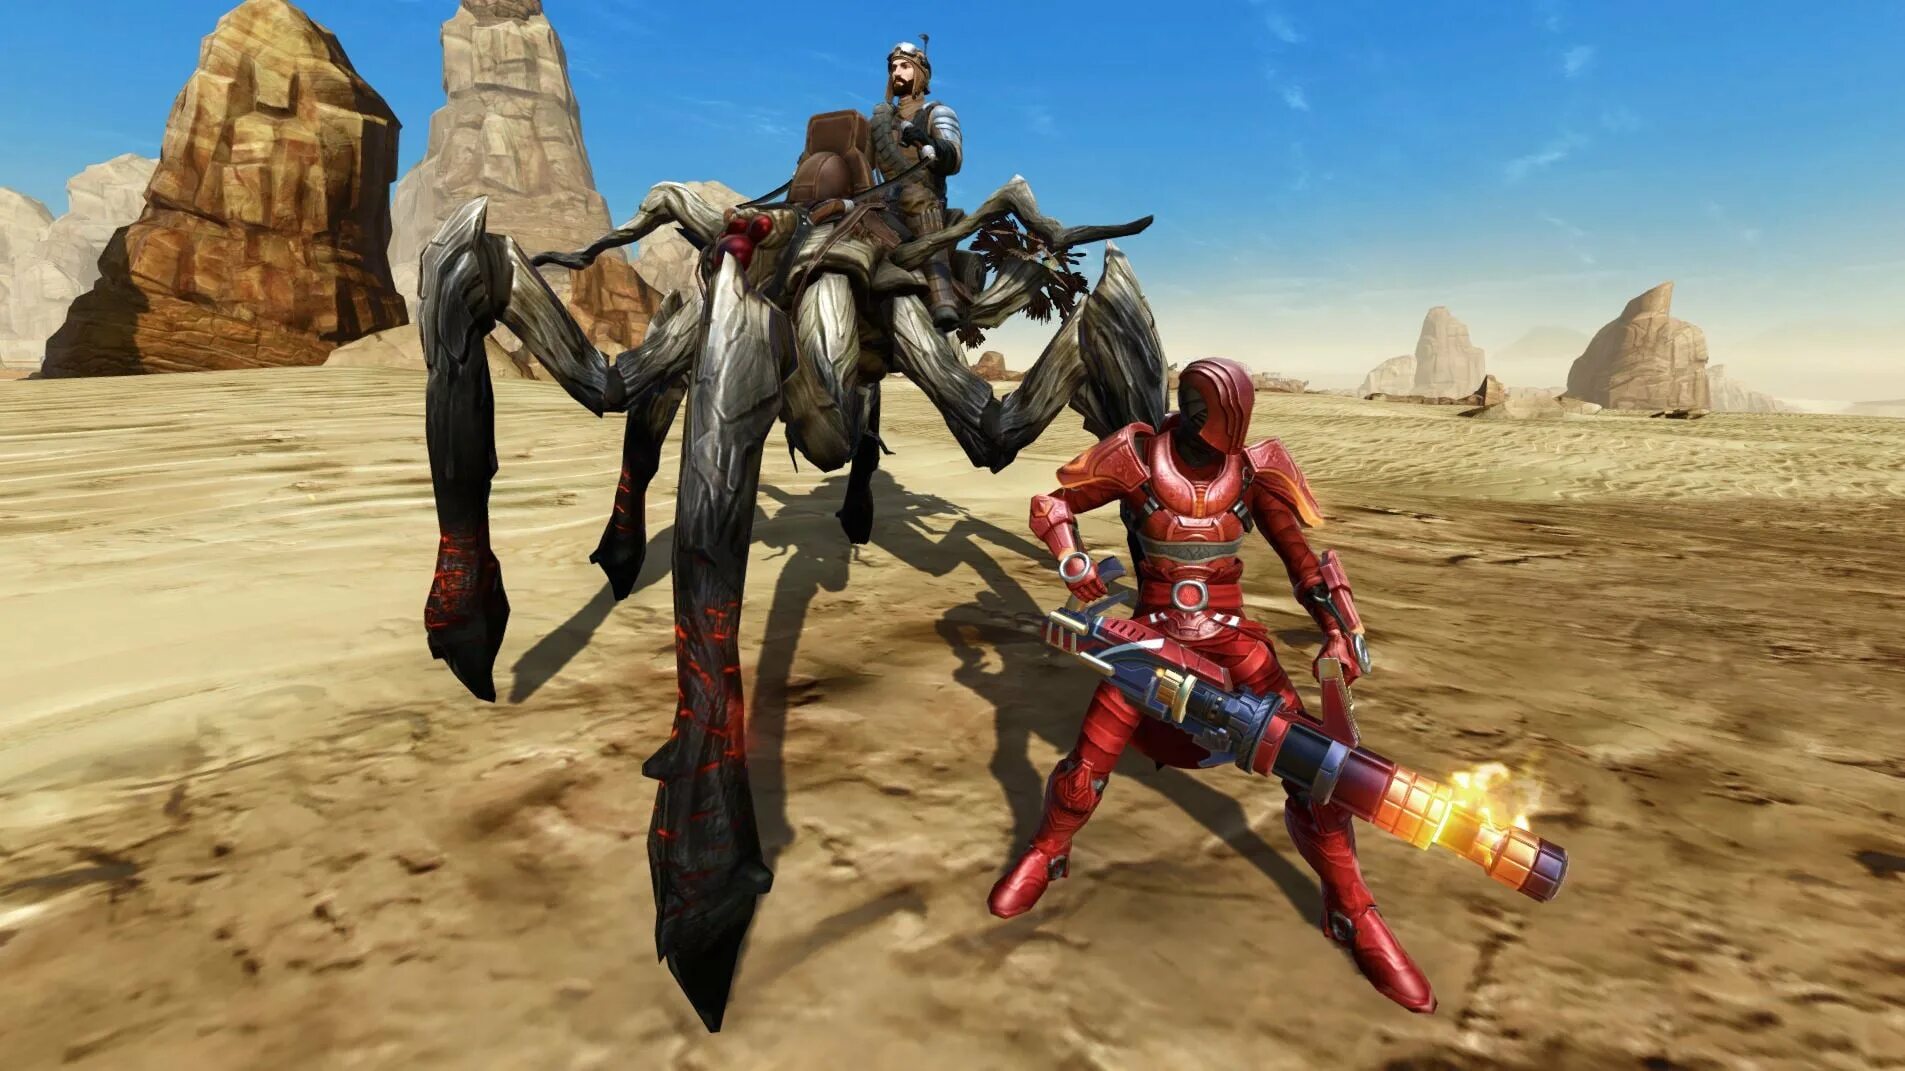 Star wars tm outlaws. Стар ВАРС ПВП игры. SWTOR Onslaught Teaser. Star Wars™: the old Republic™. SWTOR Onslaught New titles.